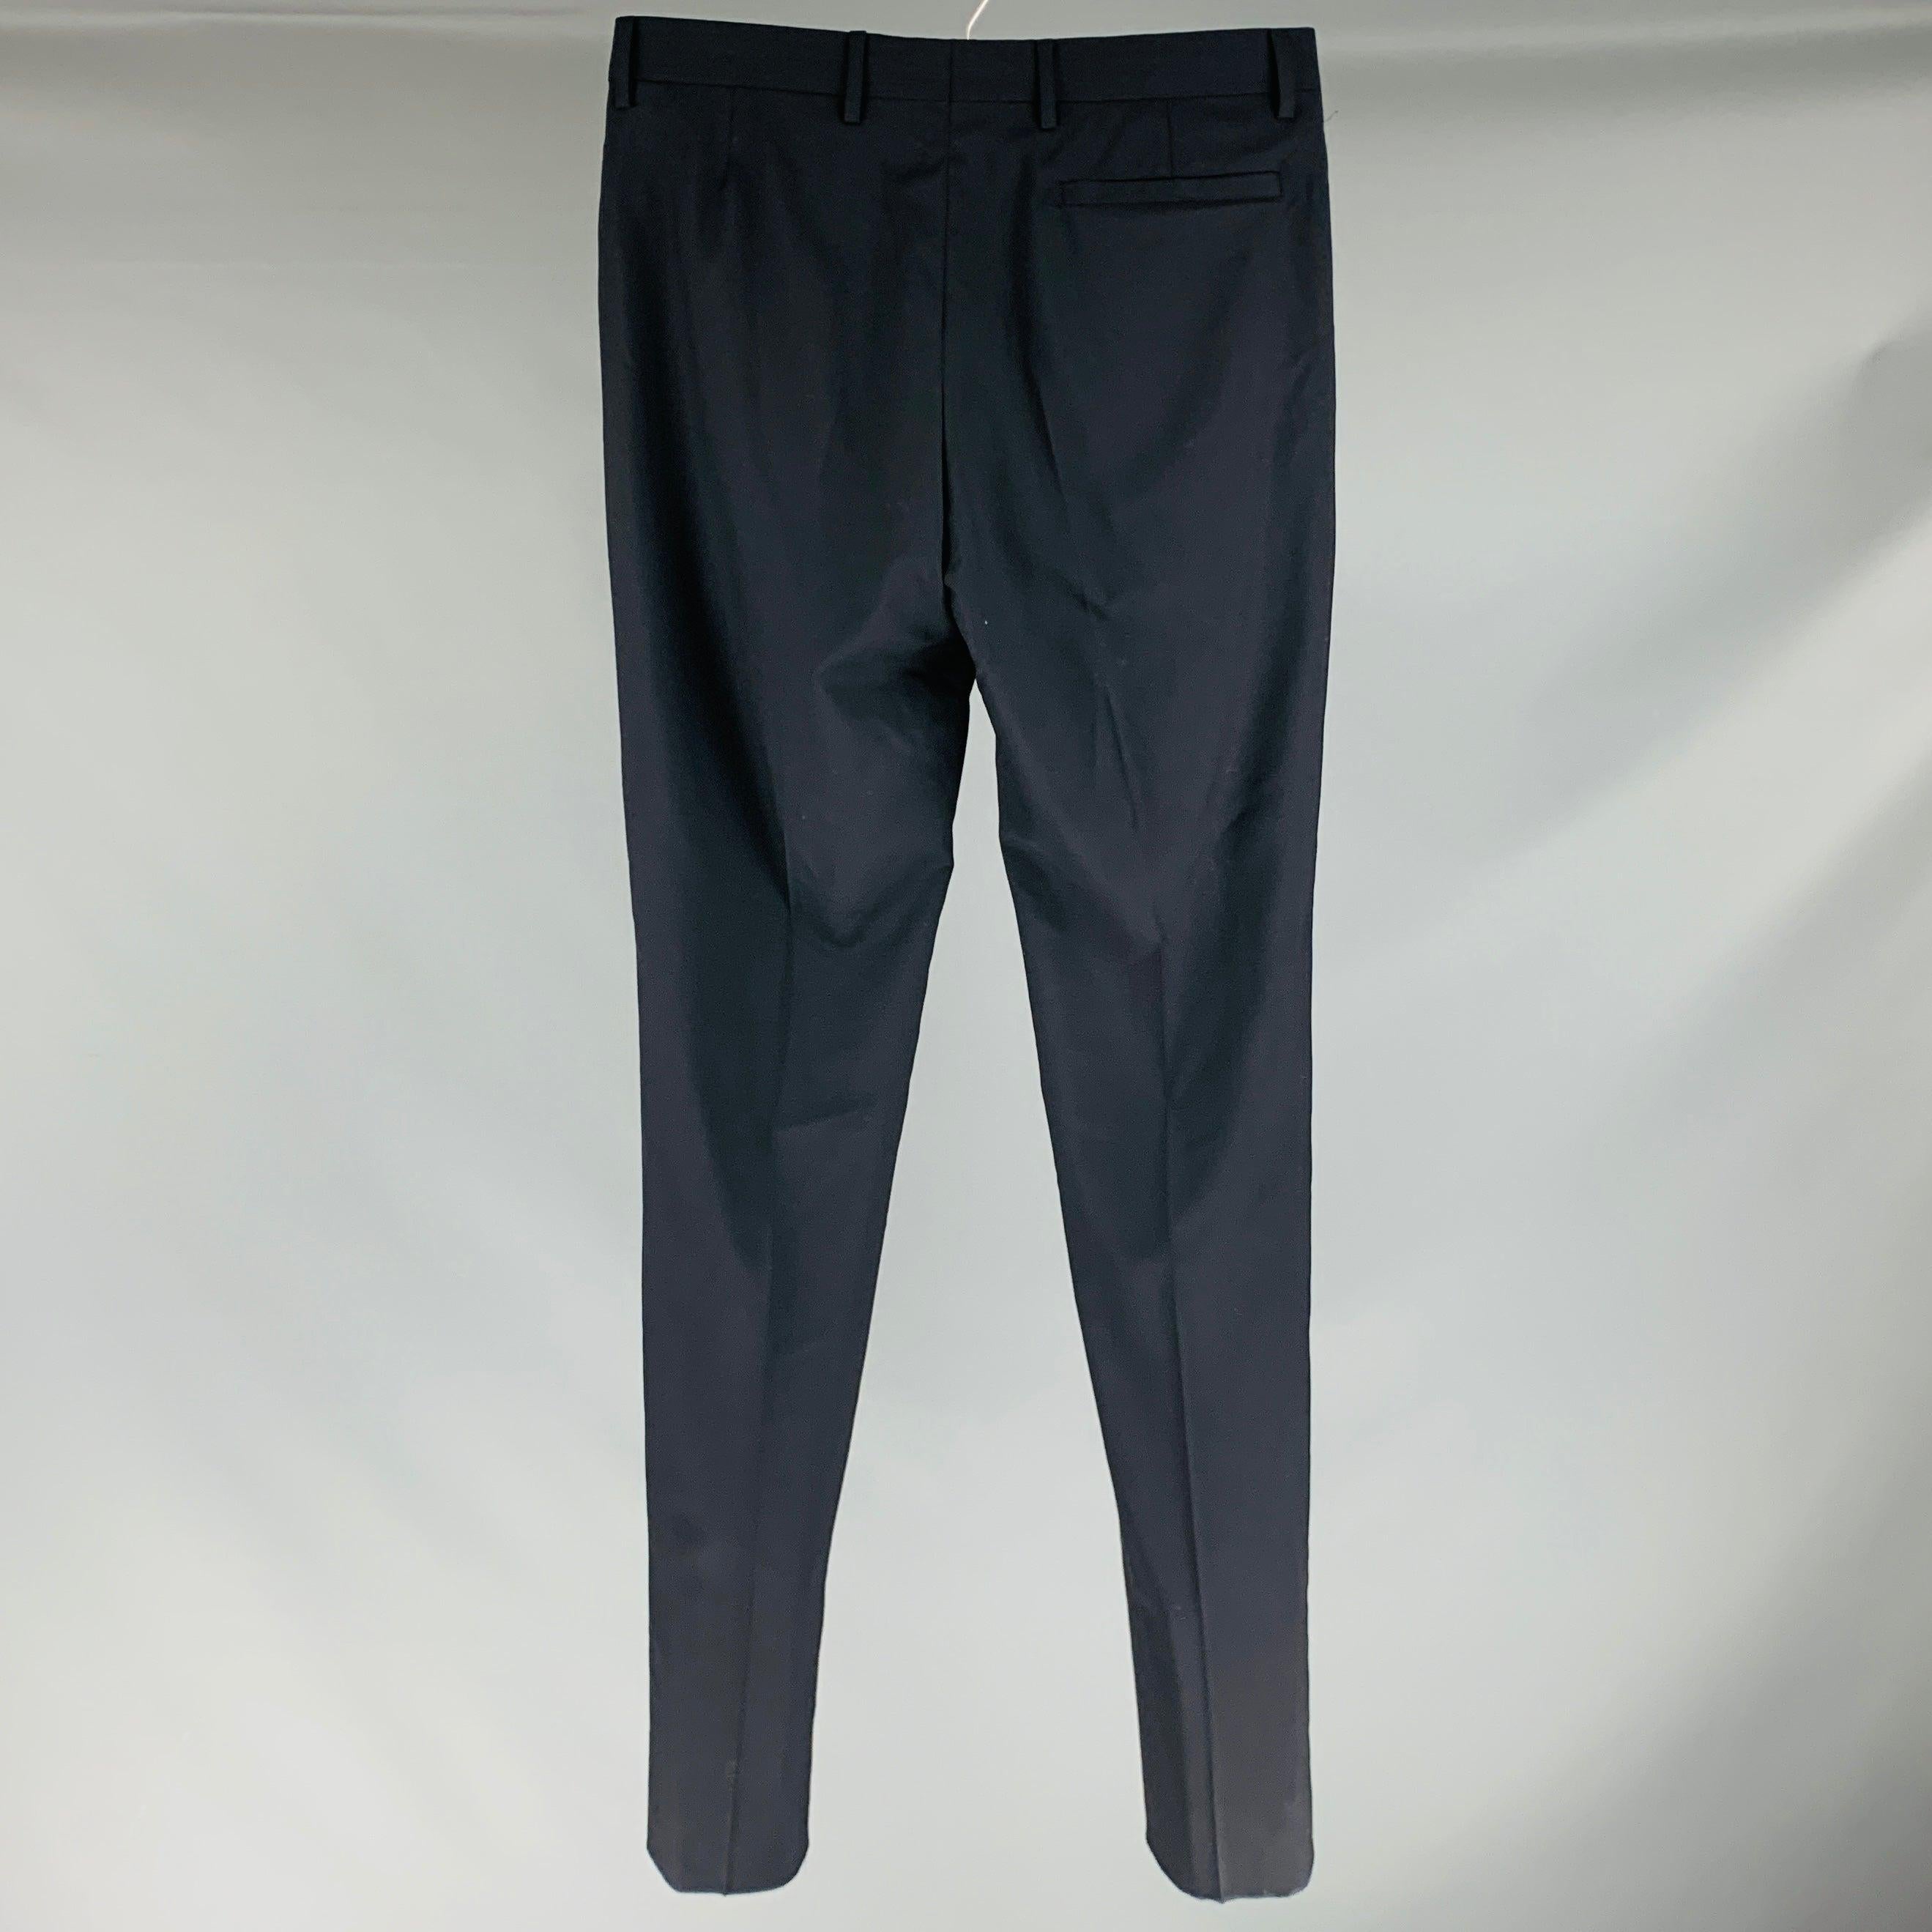 DIOR HOMME Size 30 Navy Virgin Wool Flat Front Dress Pants In Excellent Condition For Sale In San Francisco, CA